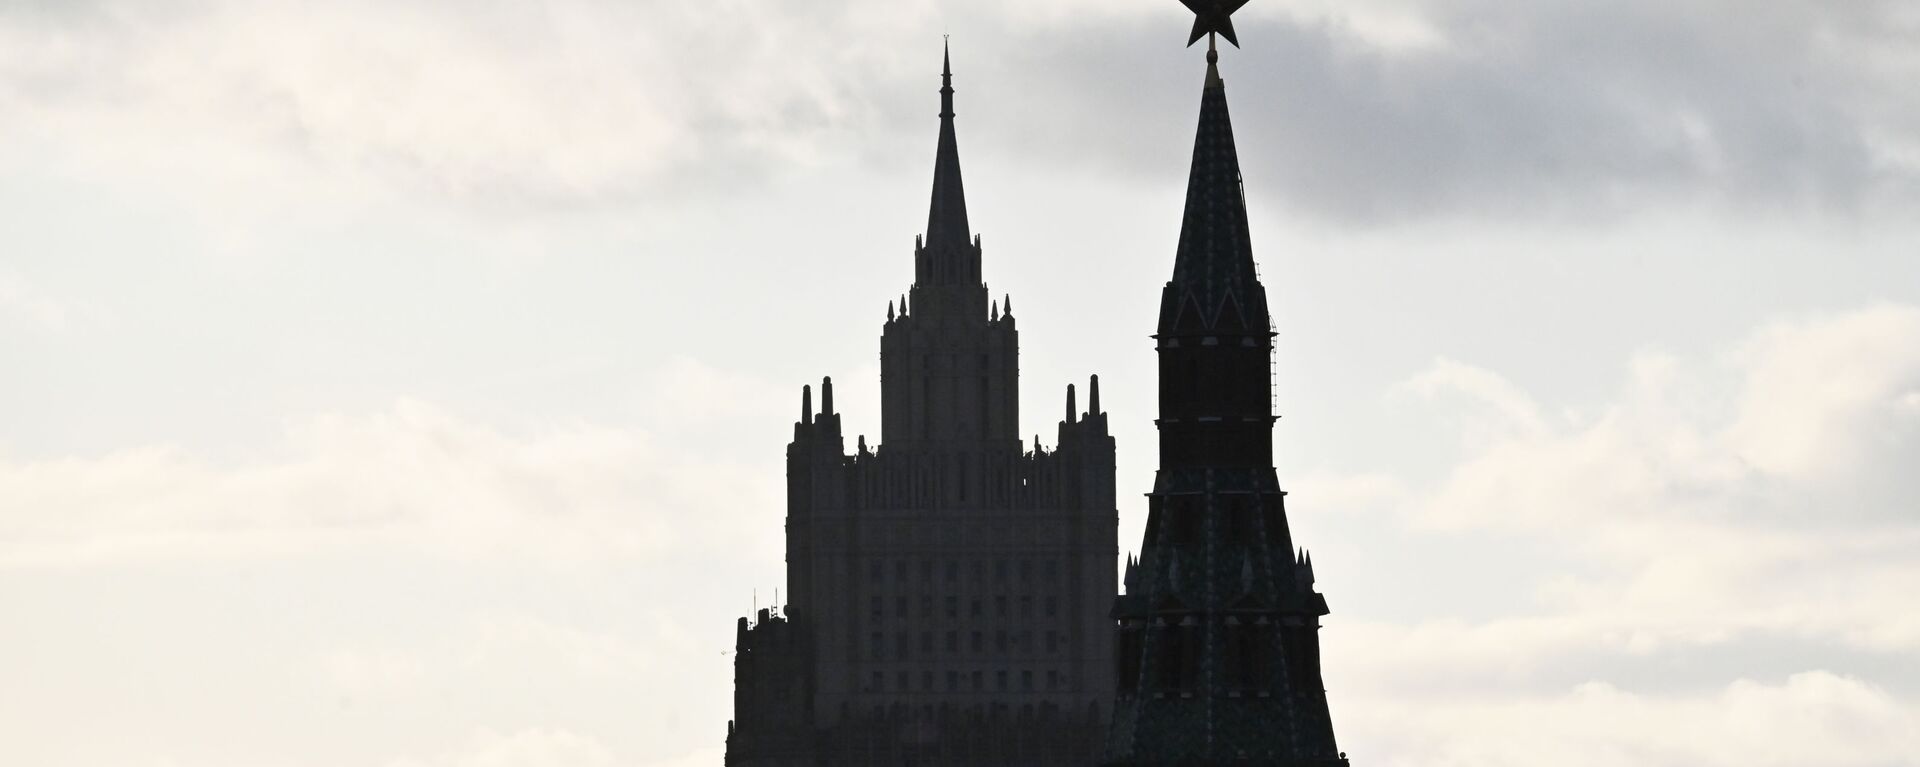 A view of the Russian Foreign Ministry and one of the Kremlin towers - Sputnik International, 1920, 16.02.2021